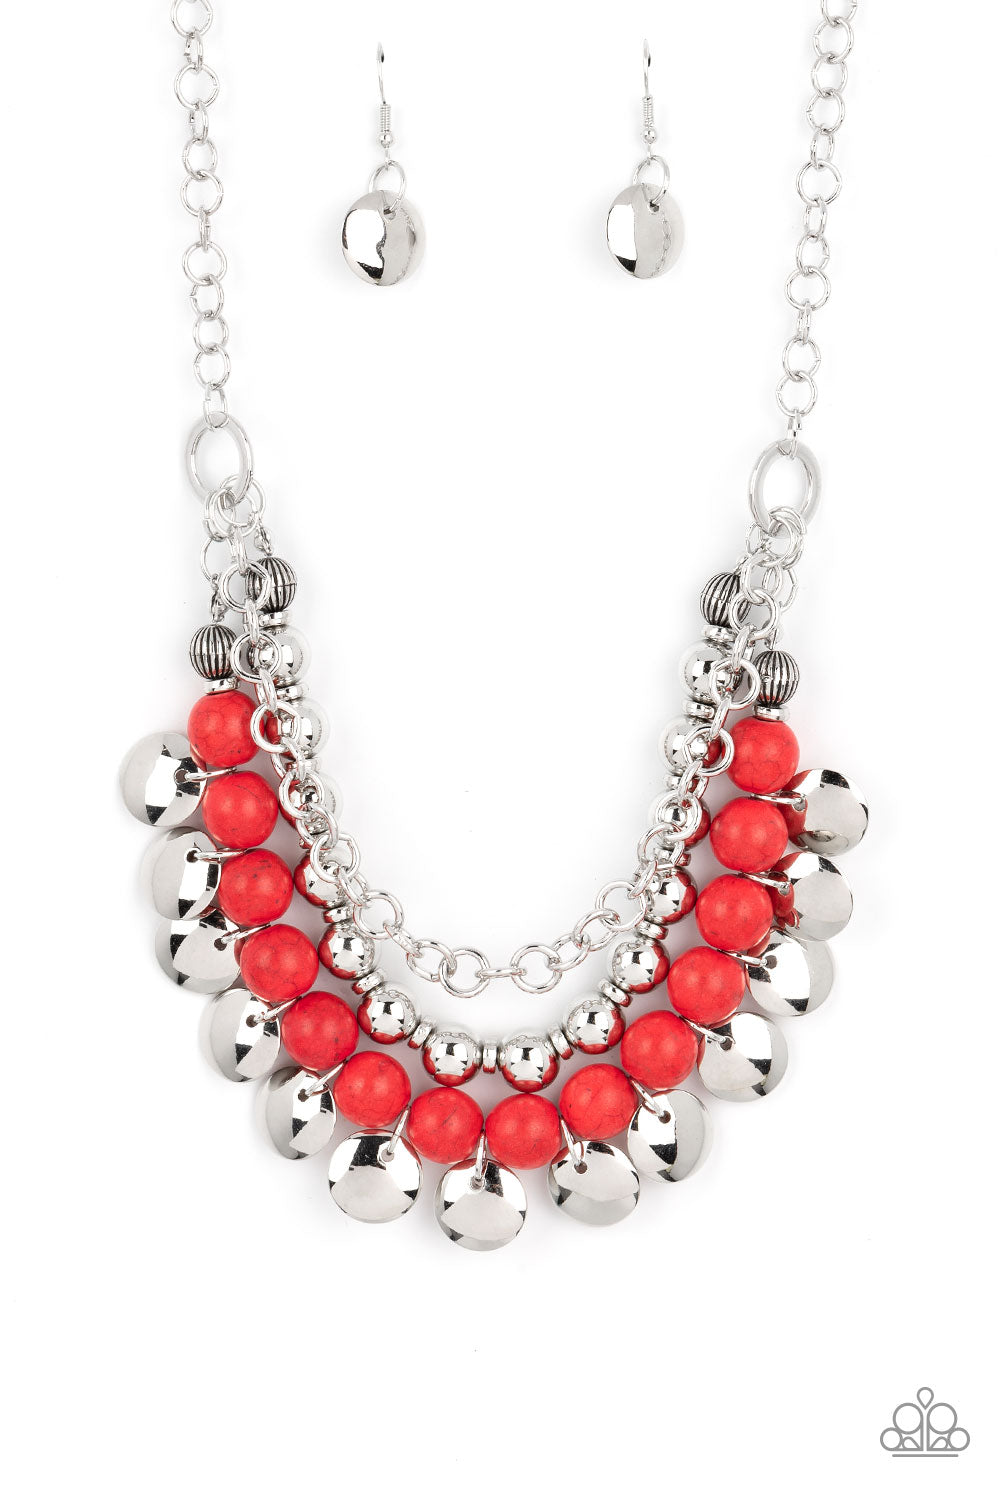 five-dollar-jewelry-leave-her-wild-red-paparazzi-accessories